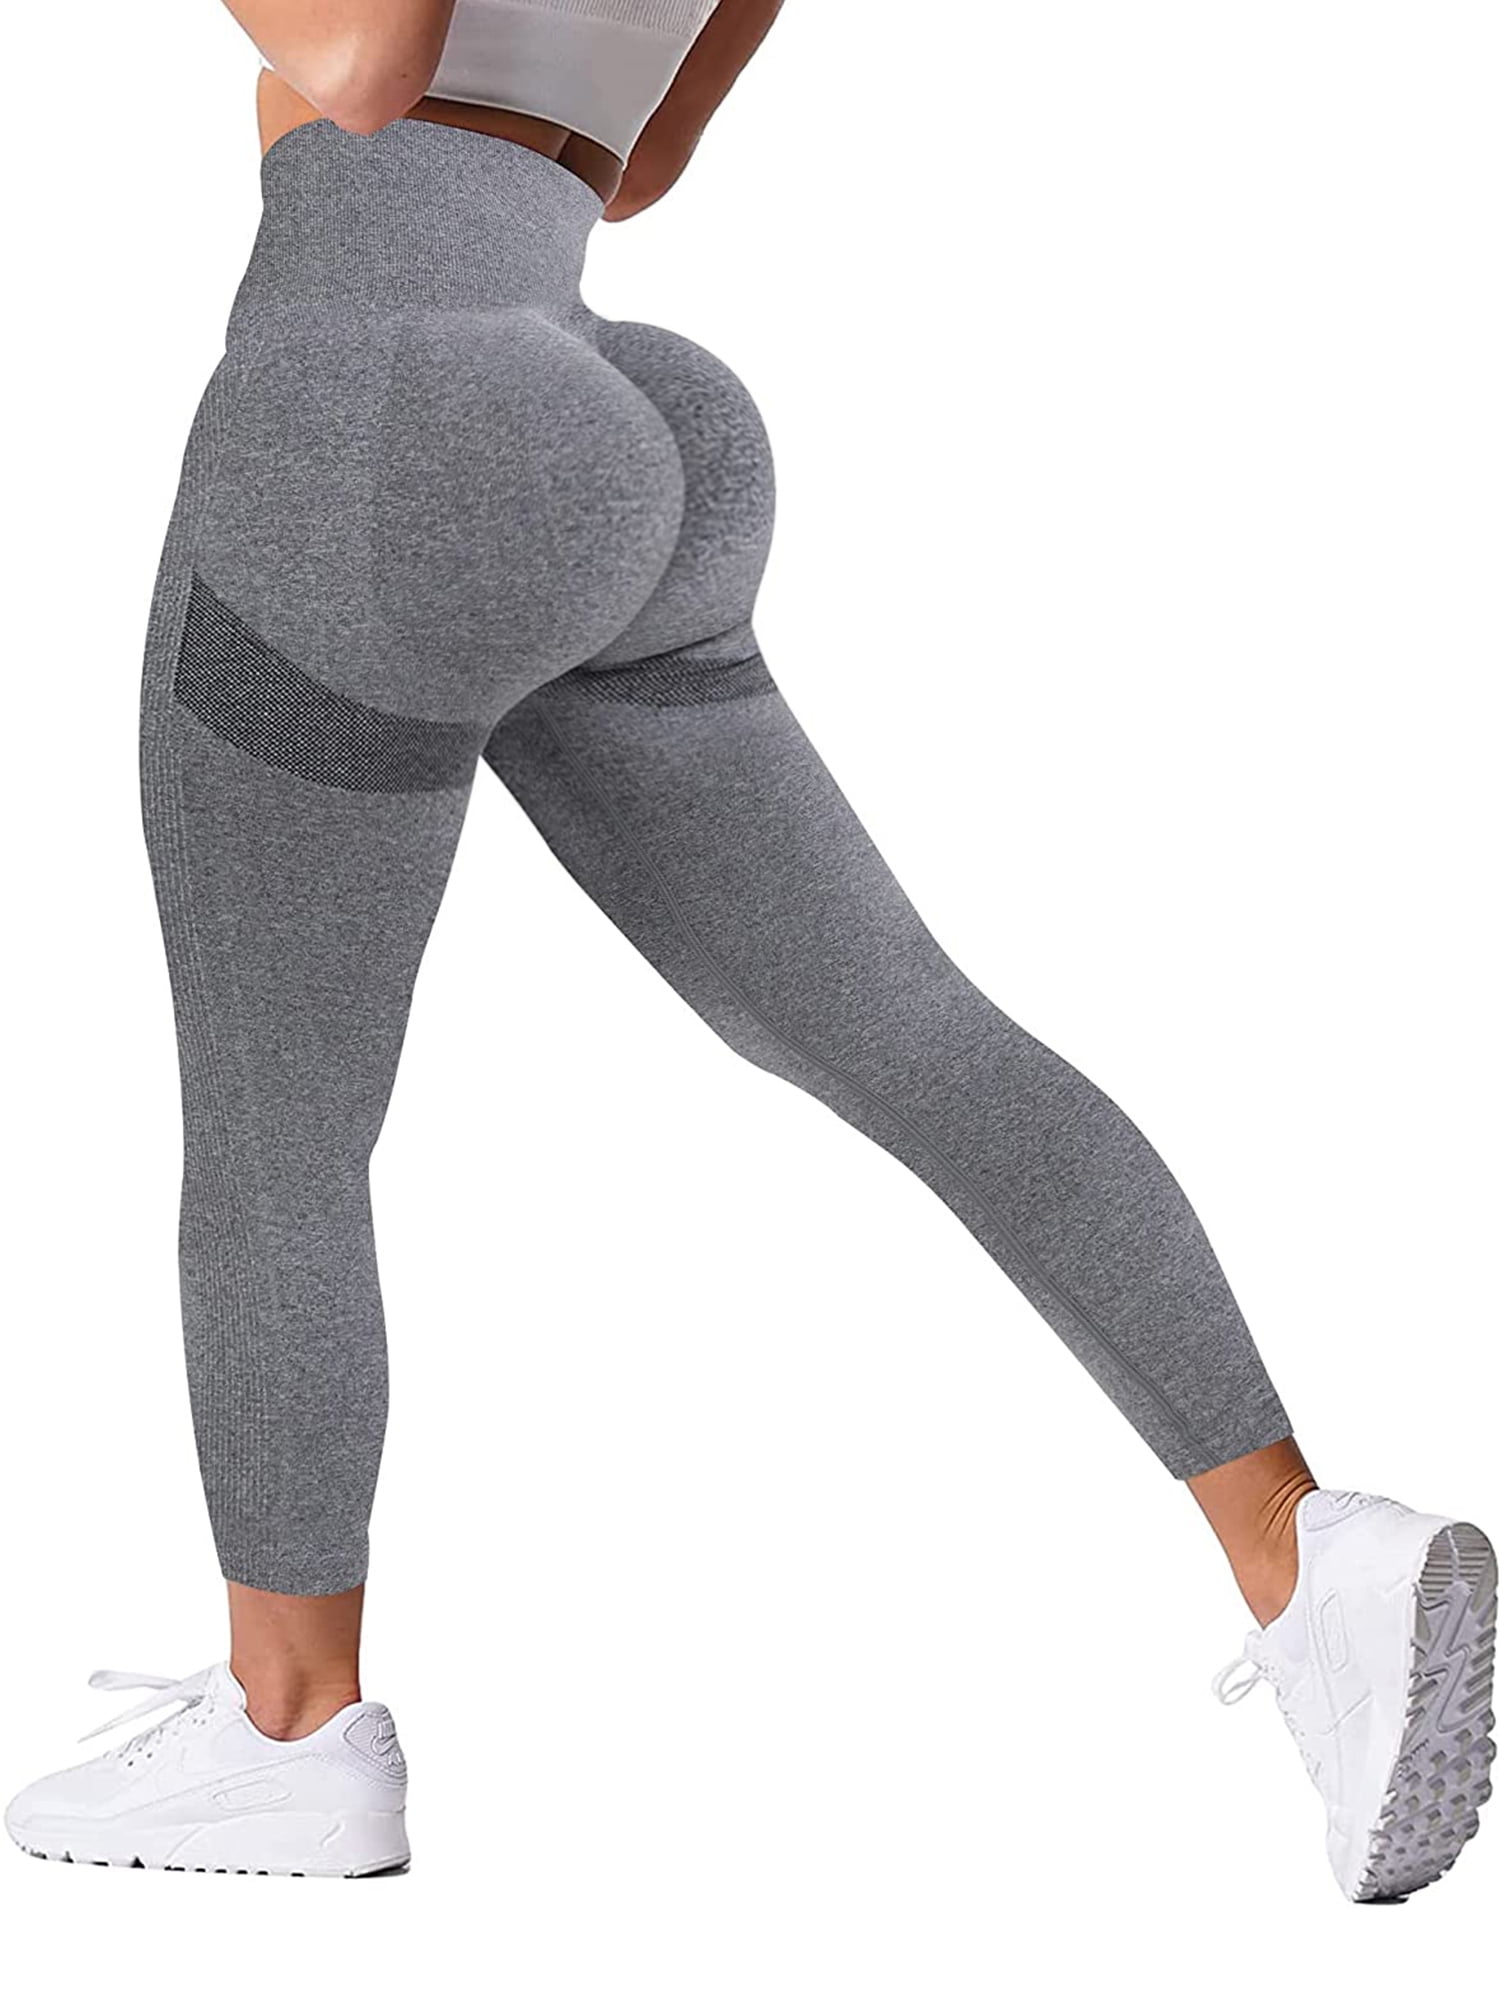 Seamless Leggings Womens Butt' Lift Curves Workout Tights Yoga